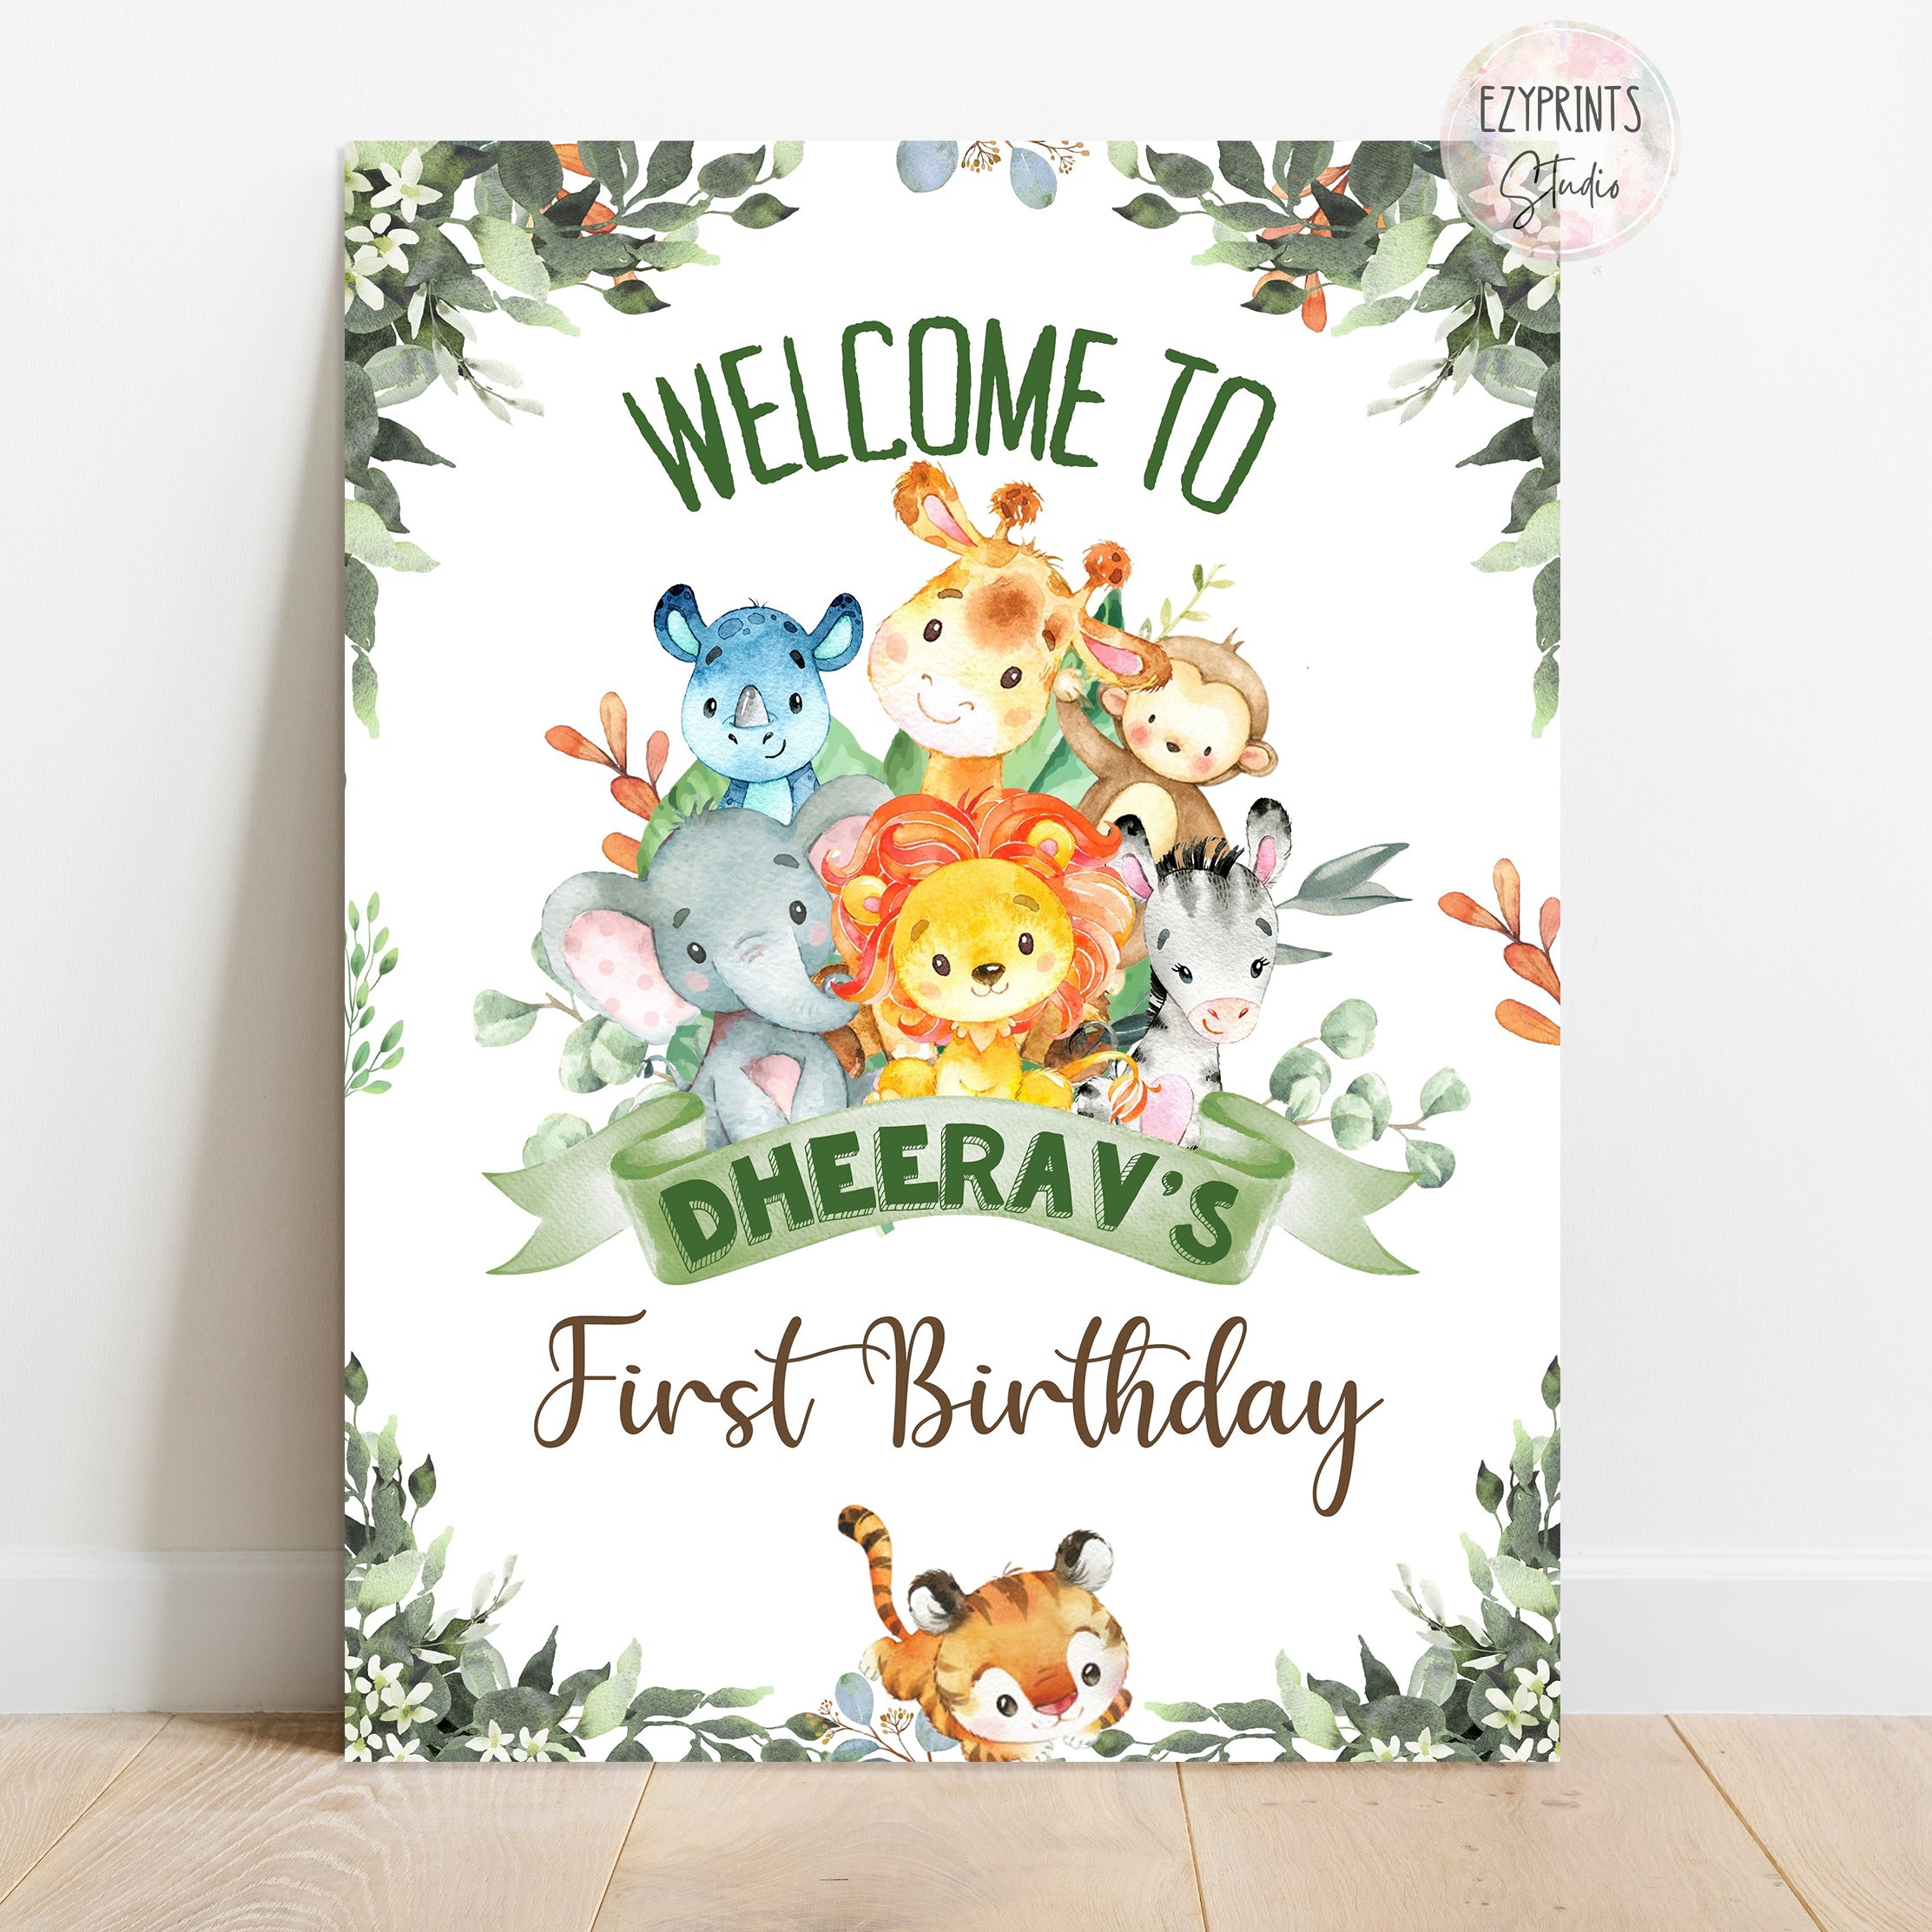 Wild Jungle Theme Birthday Party Welcome Board